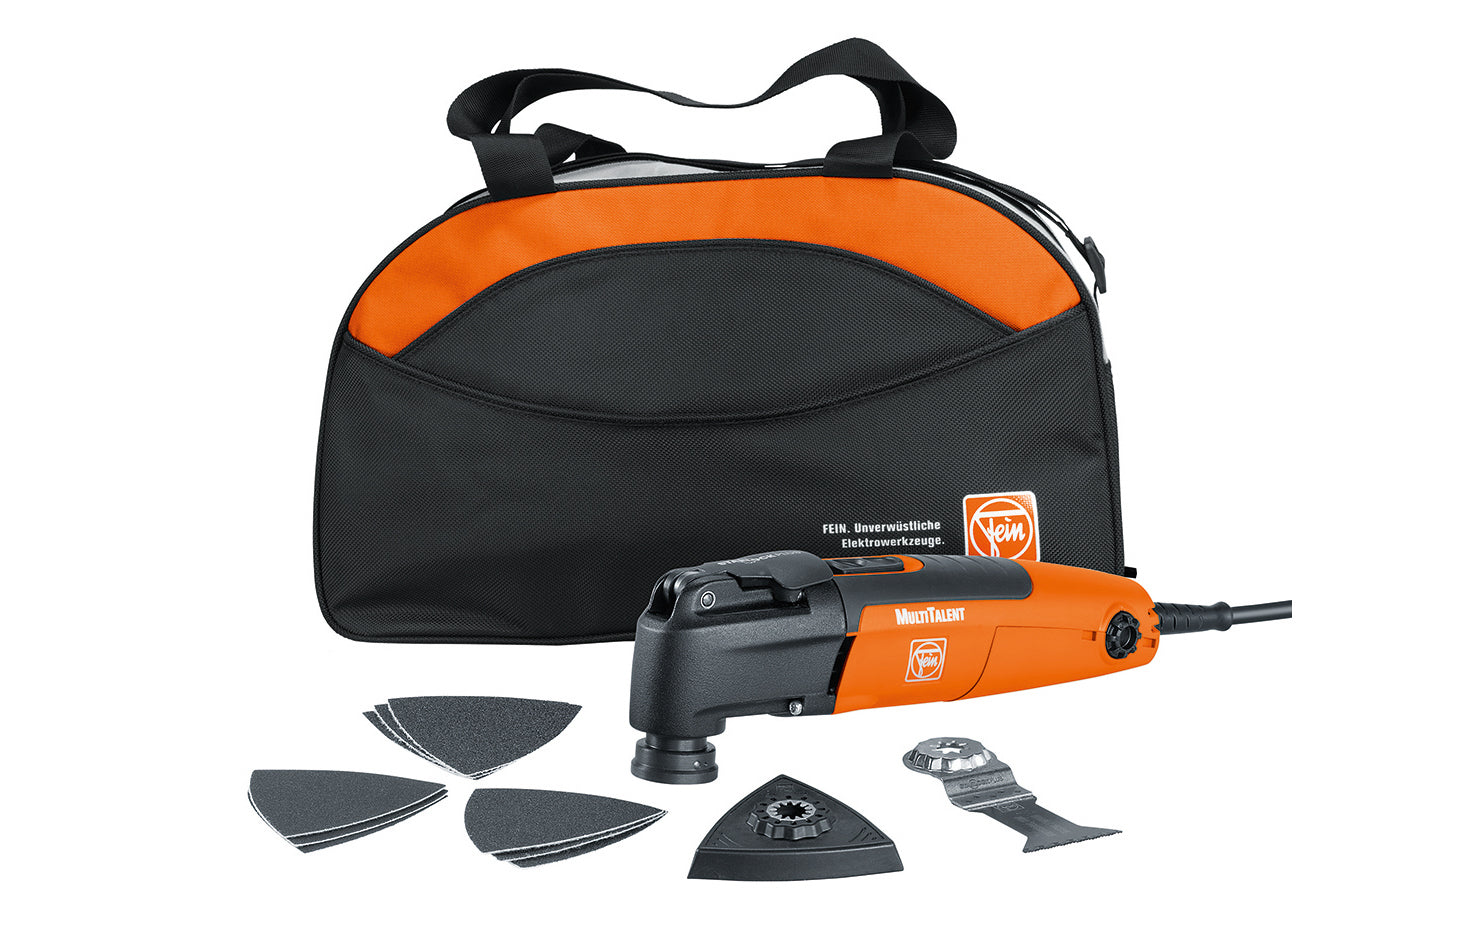 Fein MultiTalent Start Q ~ FMT 250 QSL set provides the basic accessories needed for sanding & sawing - Made in Germany ~ Model  7 229 53 62 09 0. Nylon tool bag. 72295362090. 2.4 A / 250 W Motor. 10,000-20,000 rpm. Starlock Plus mounting system. UPC 4014586885001. Unperforated backing pad, (3) saw blades, sandpaper